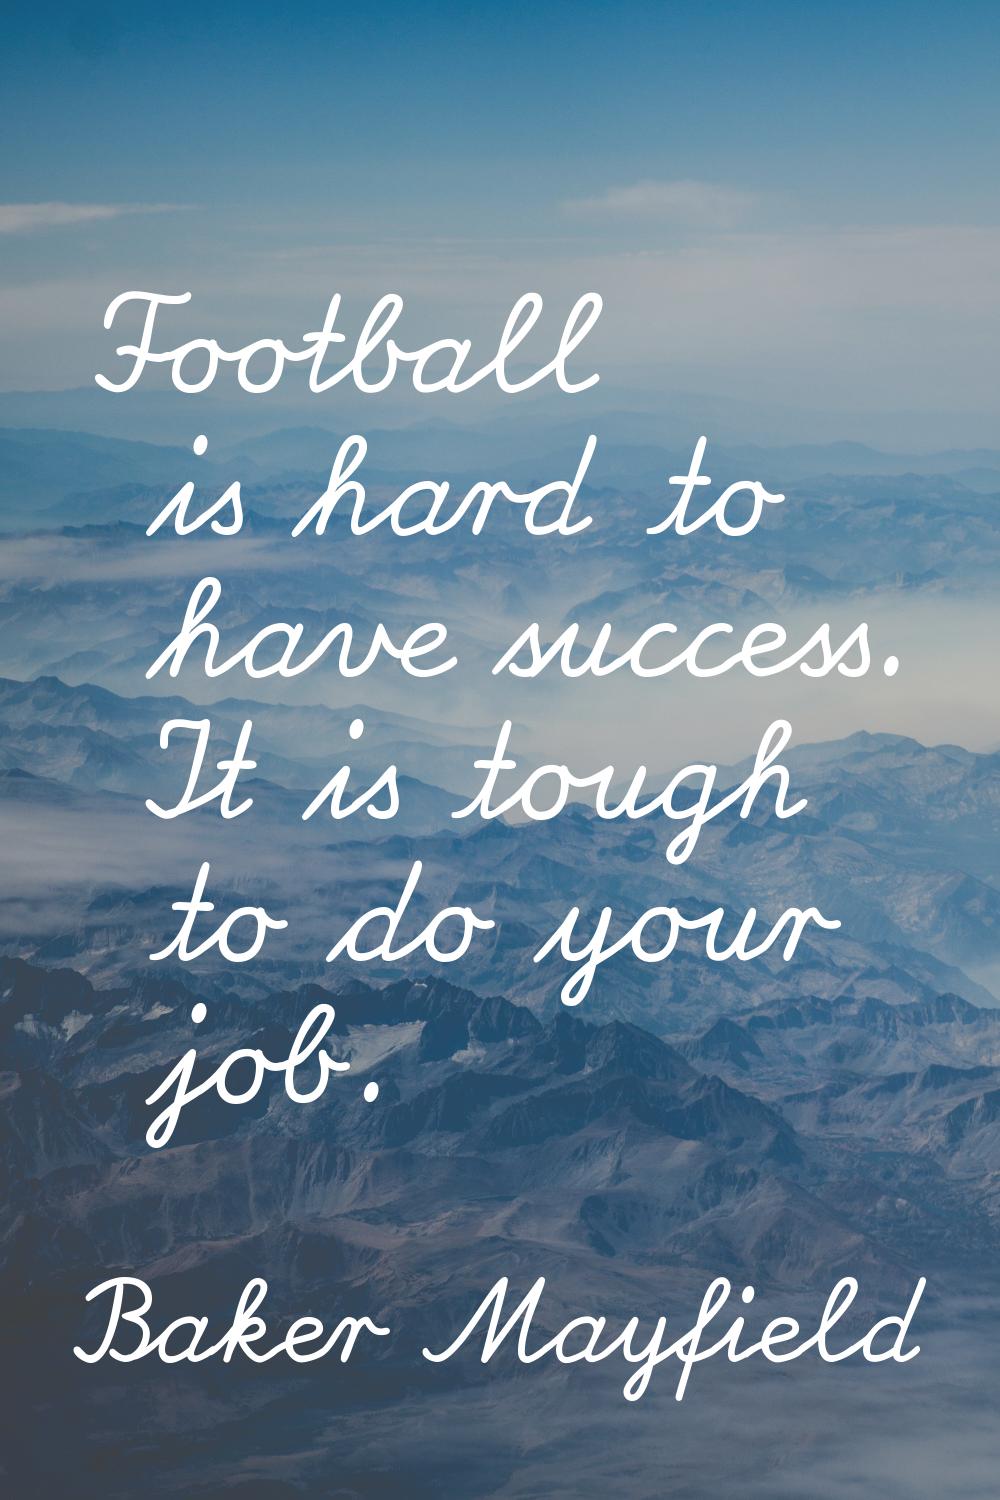 Football is hard to have success. It is tough to do your job.